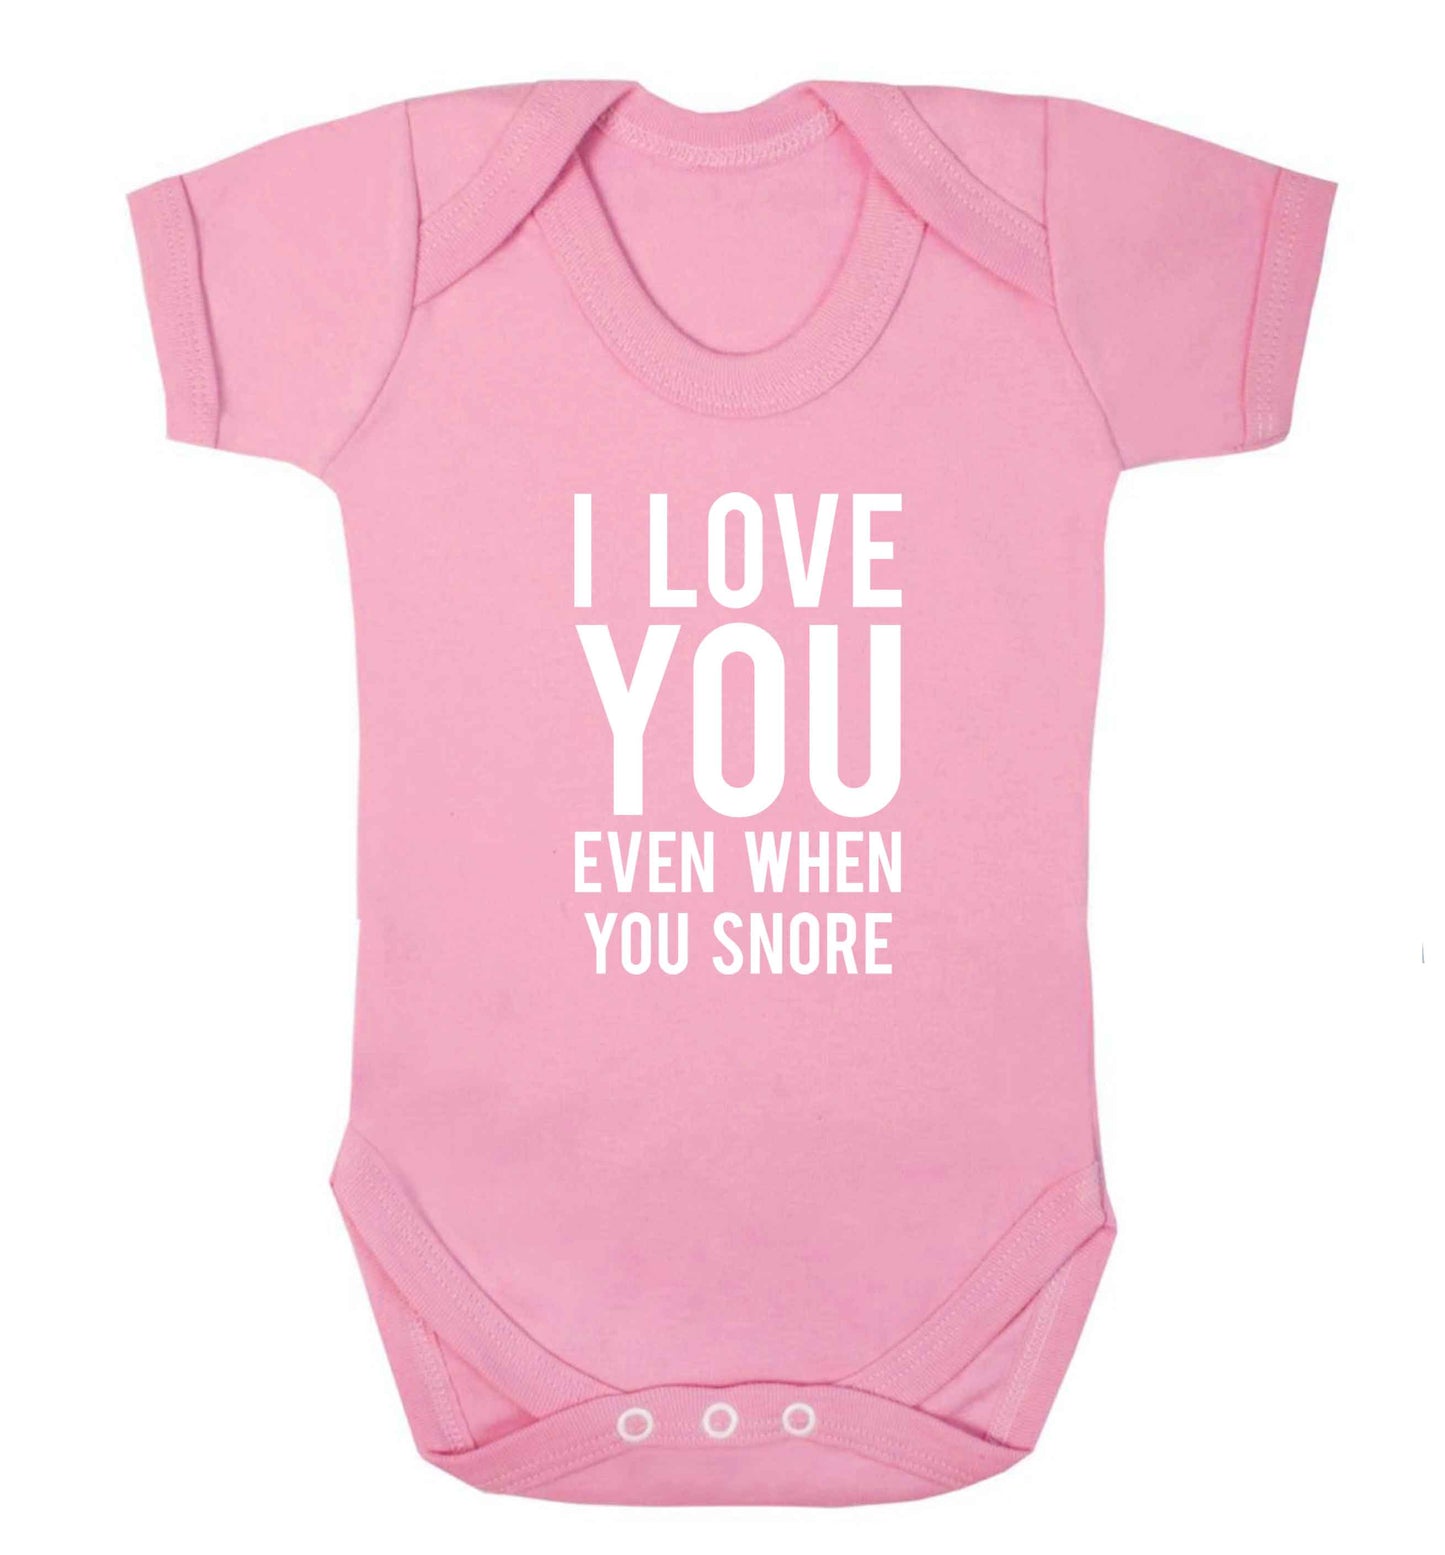 I love you even when you snore baby vest pale pink 18-24 months